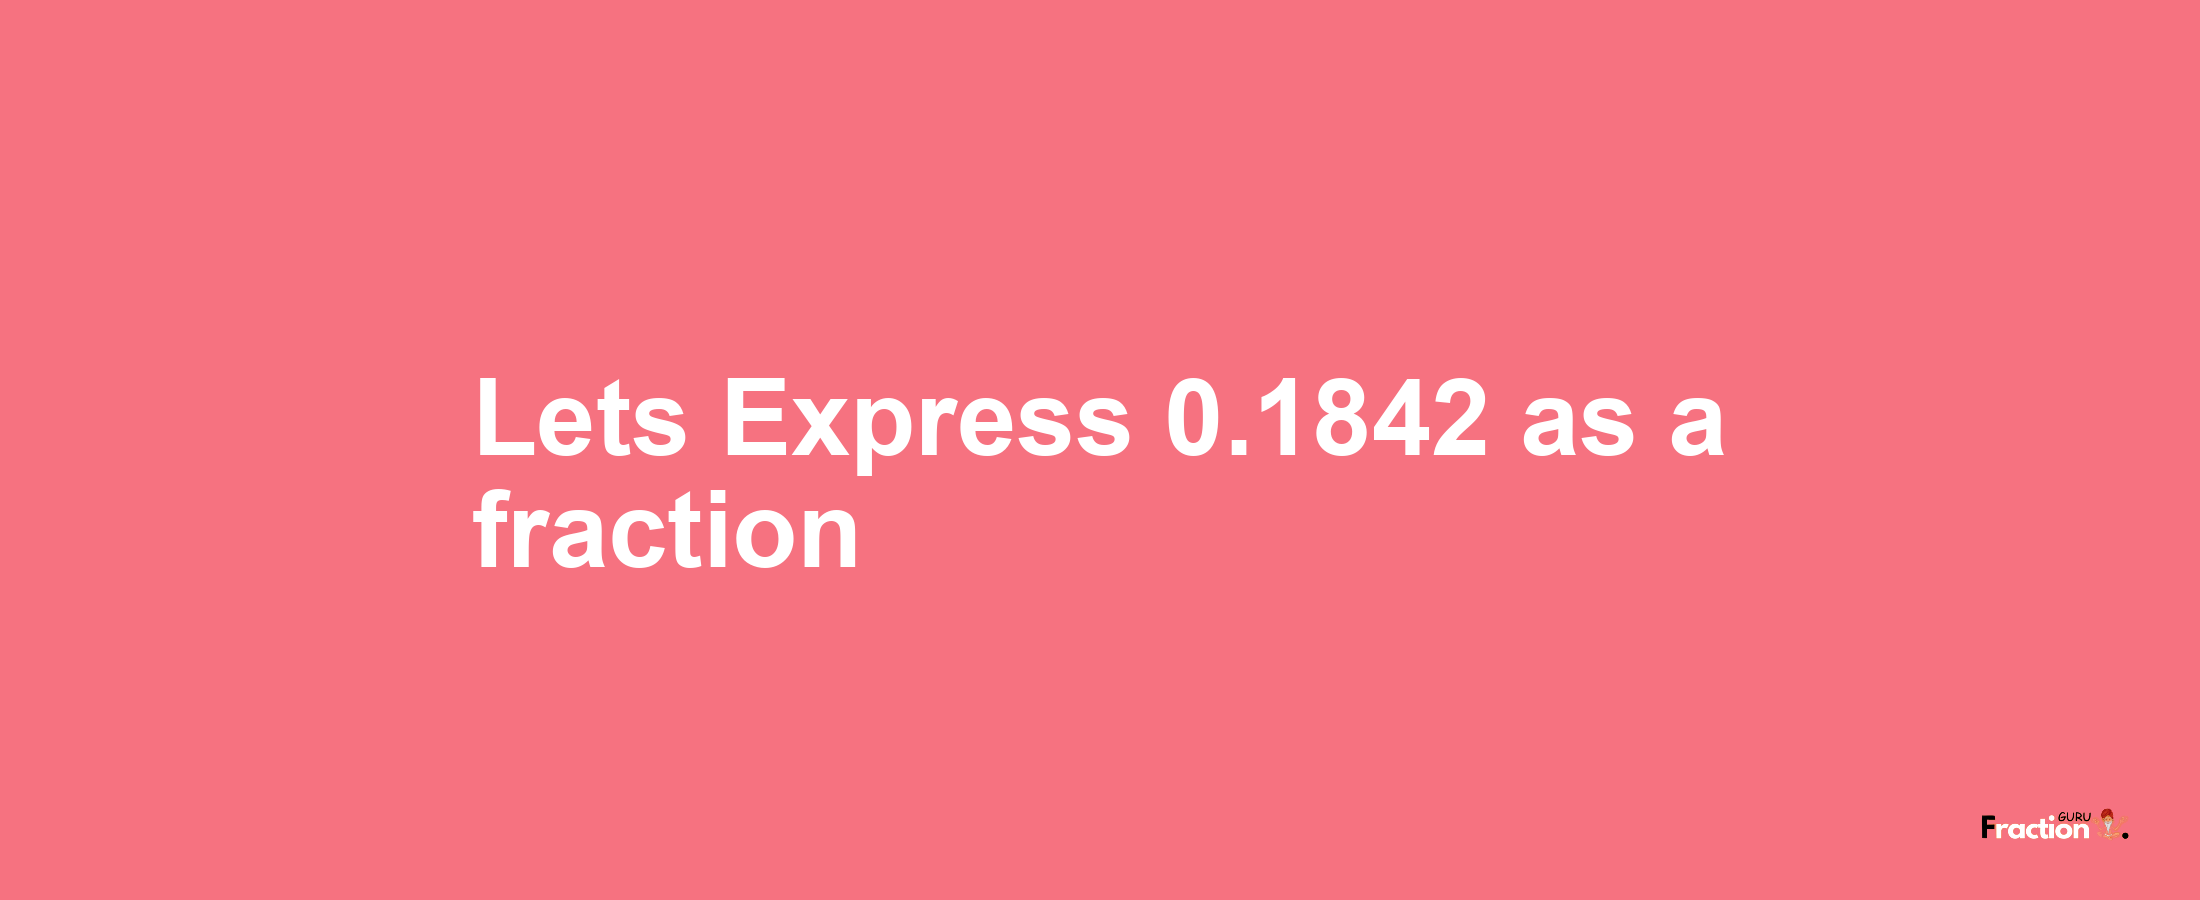 Lets Express 0.1842 as afraction